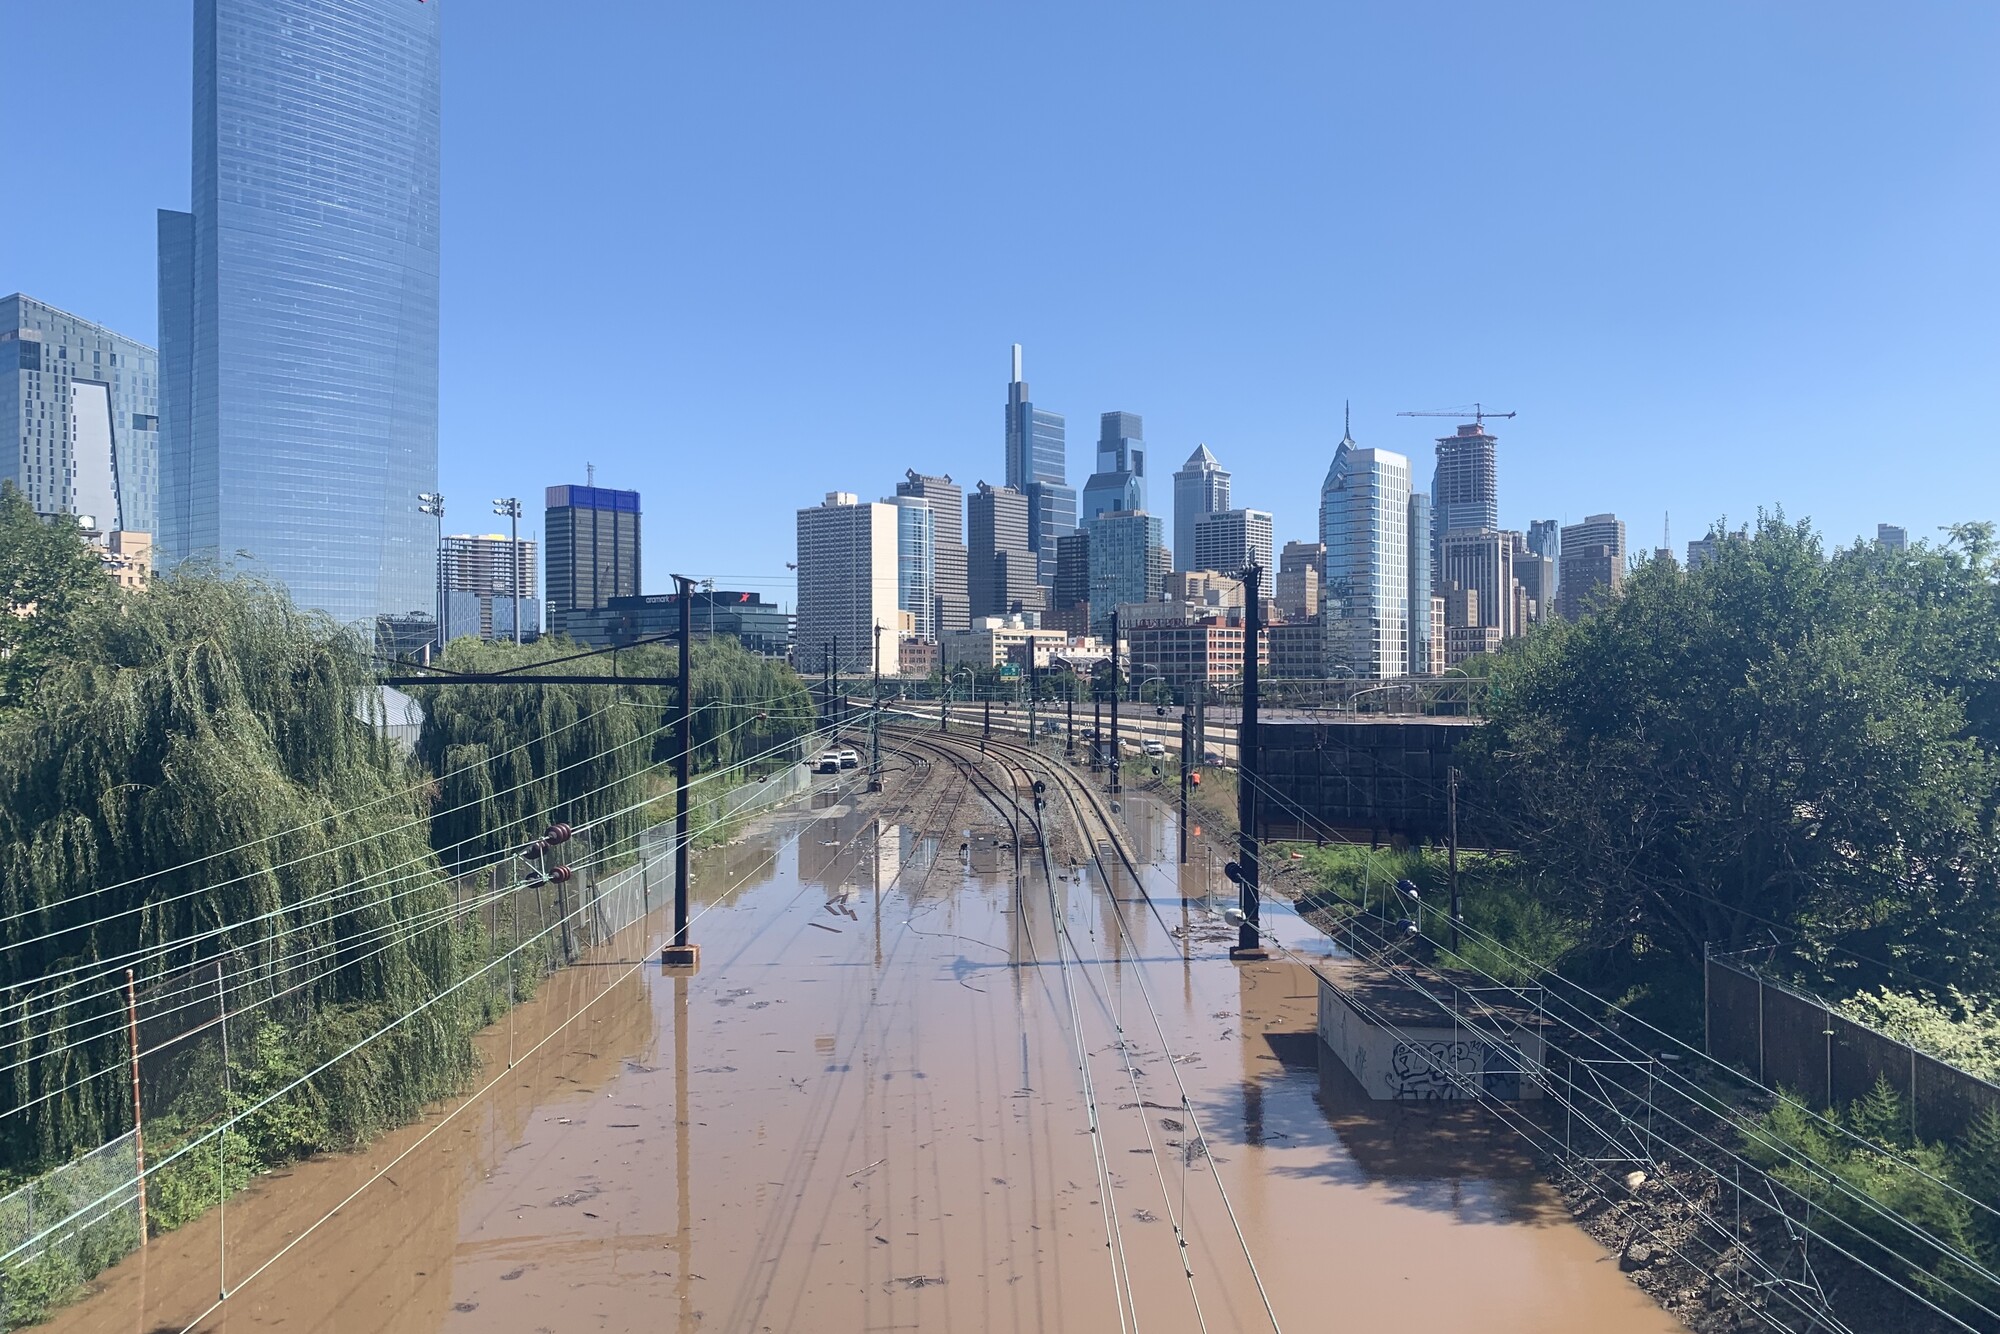 Schuykill River flooded along train tracks with cityscape of Philadelphia in distance.